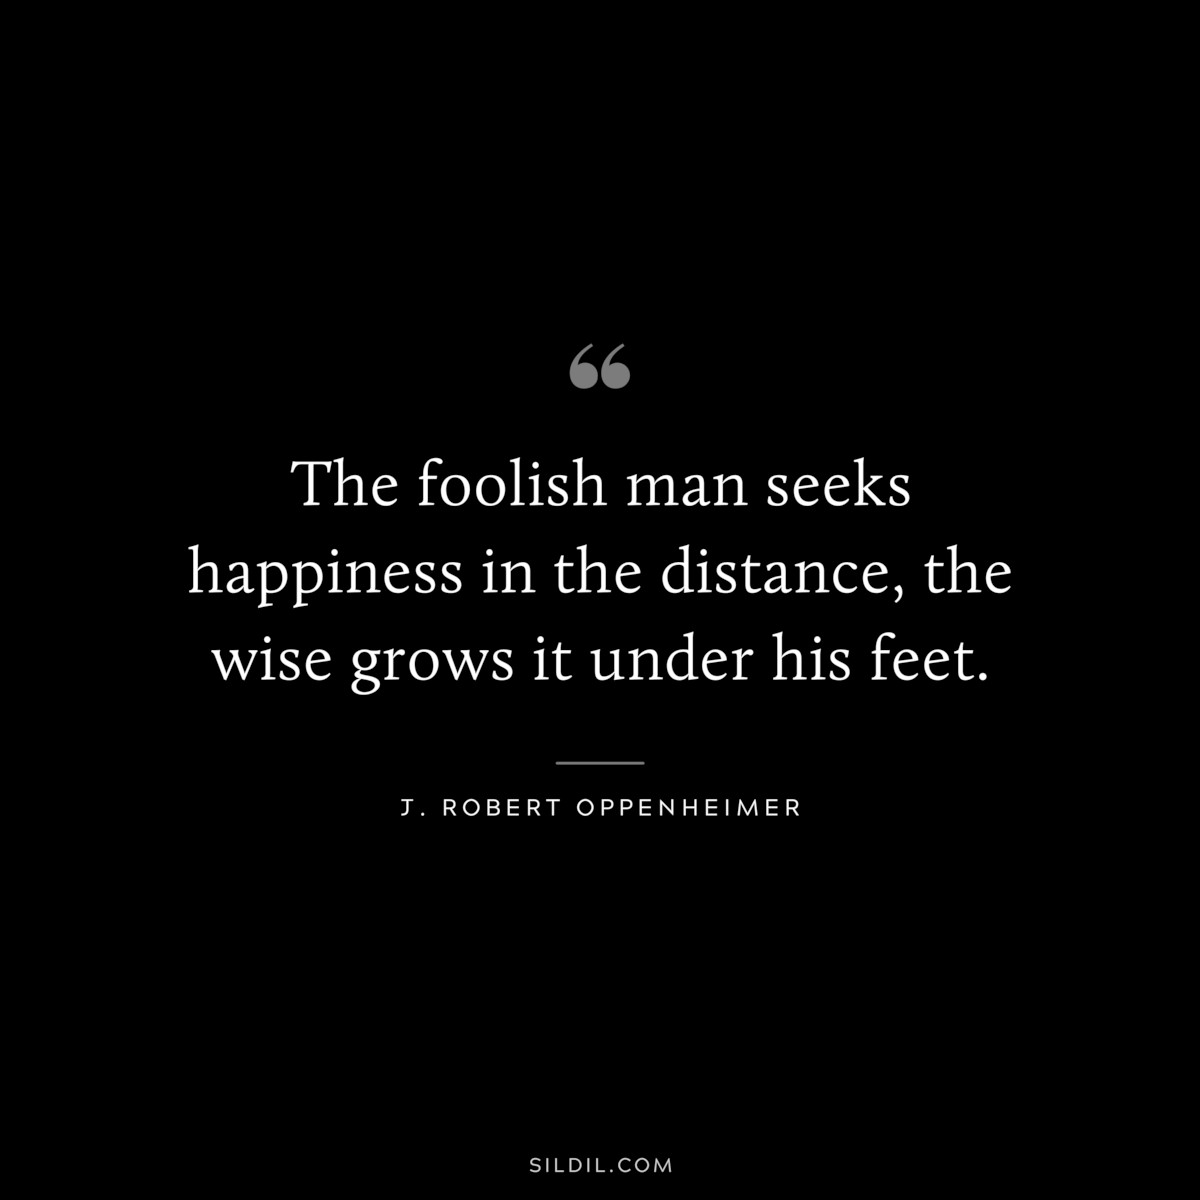 The foolish man seeks happiness in the distance, the wise grows it under his feet. ― J. Robert Oppenheimer